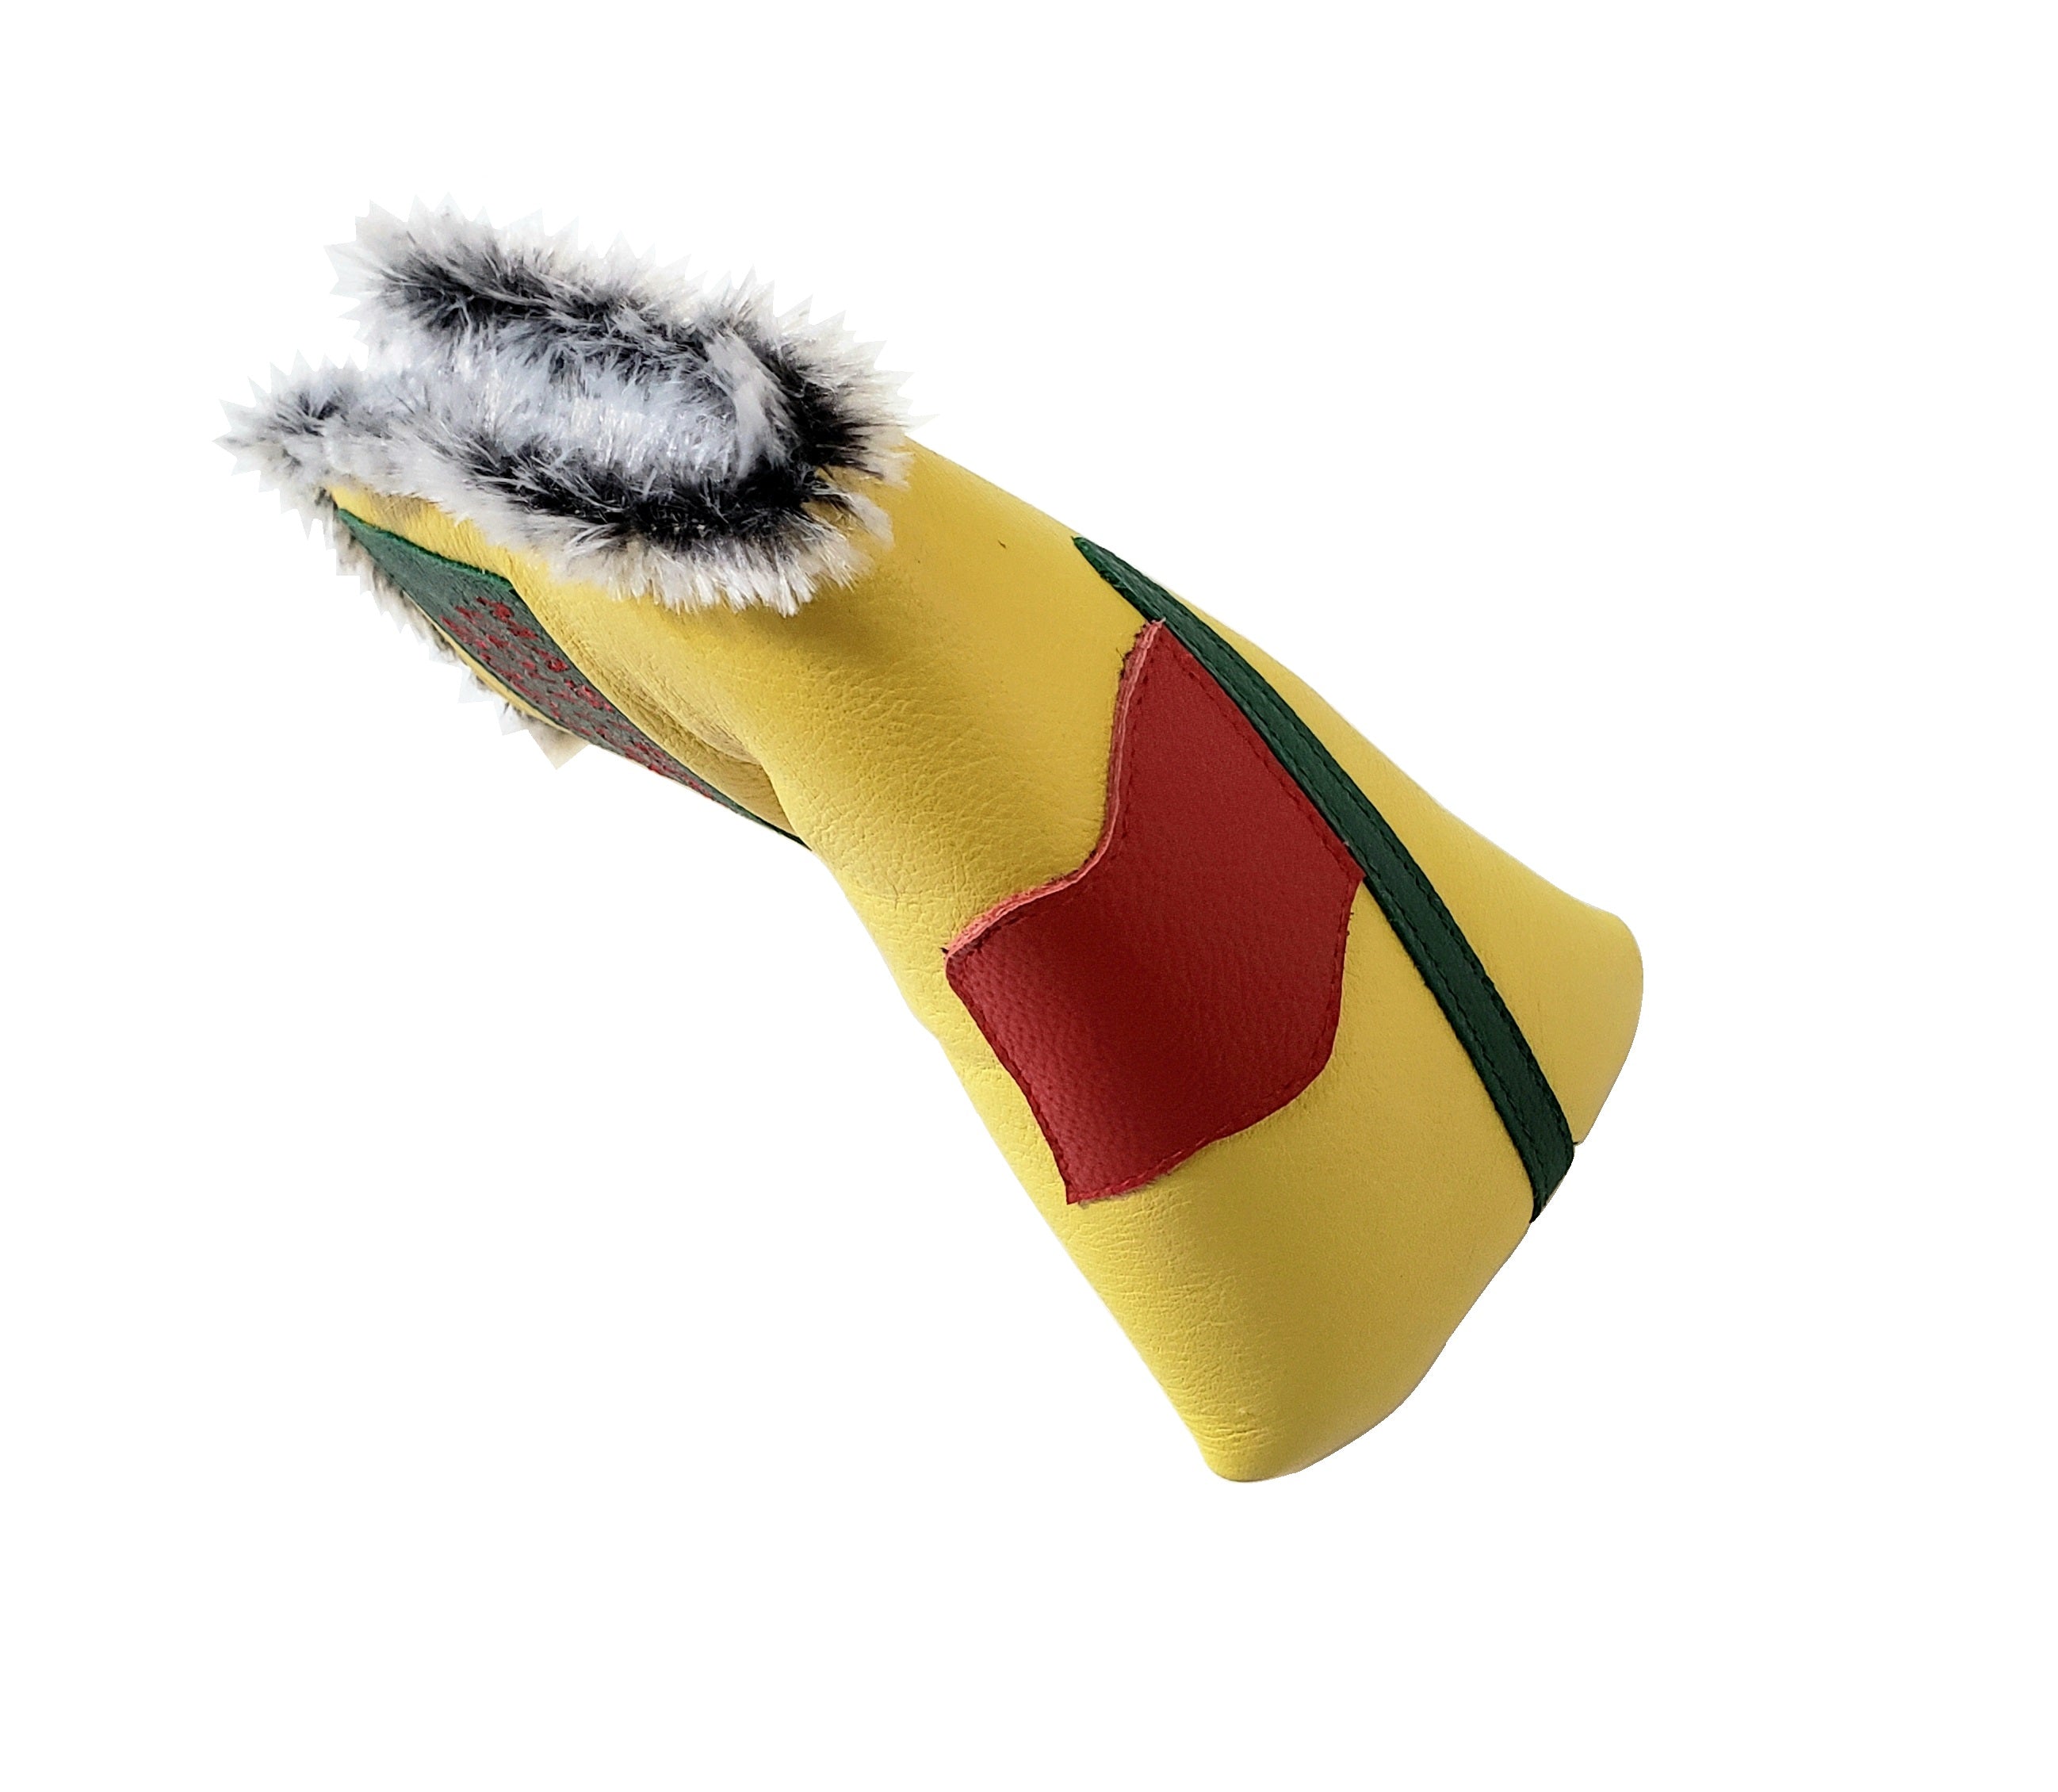 NEW! The 2022 Masters/Augusta Inspired  Putter Cover - Robert Mark Golf